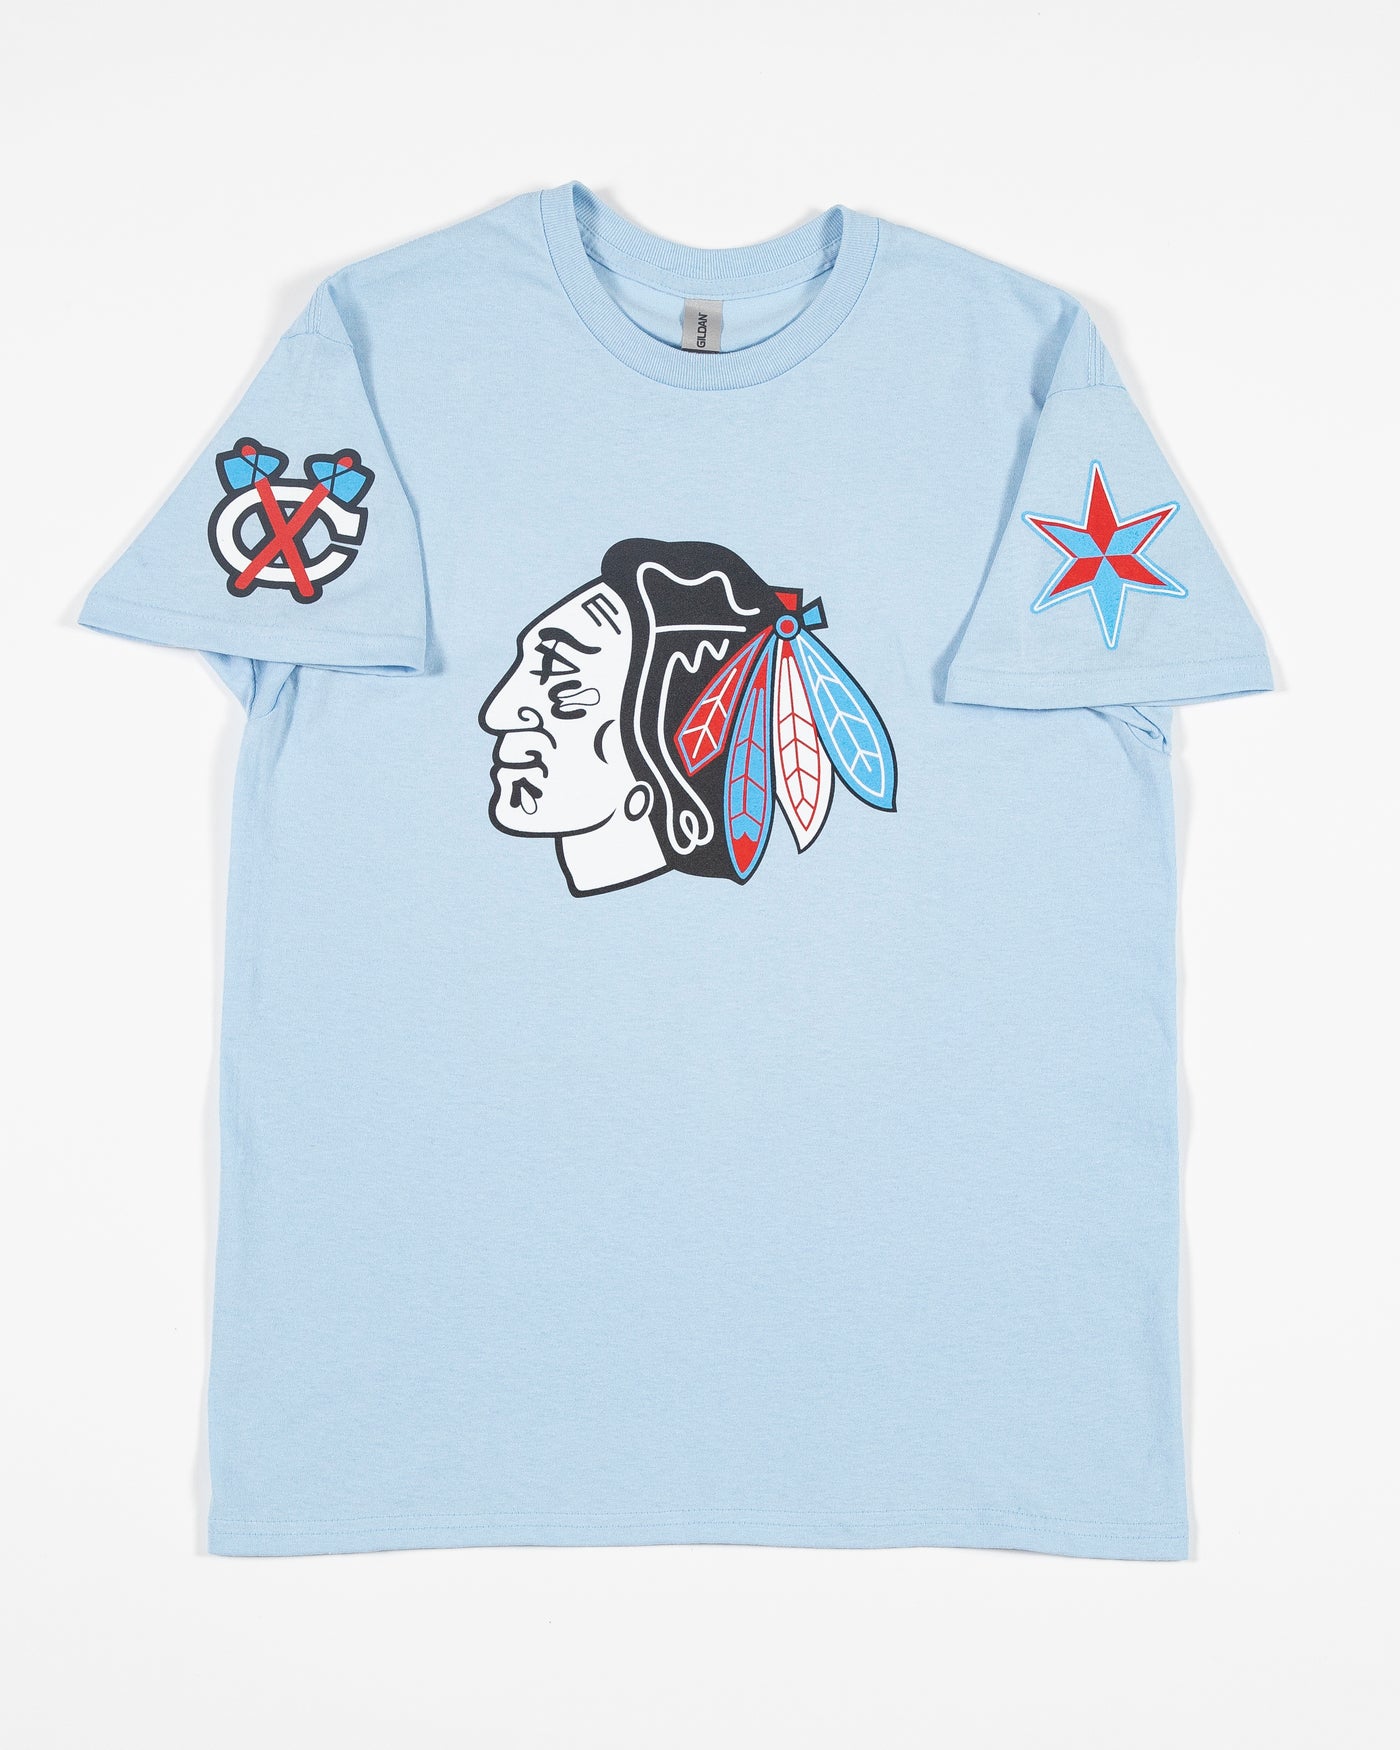 light blue tee with tonal Chicago Blackhawks primary logo across chest, tonal secondary logo on right shoulder and star graphic on left shoulder - front lay flat